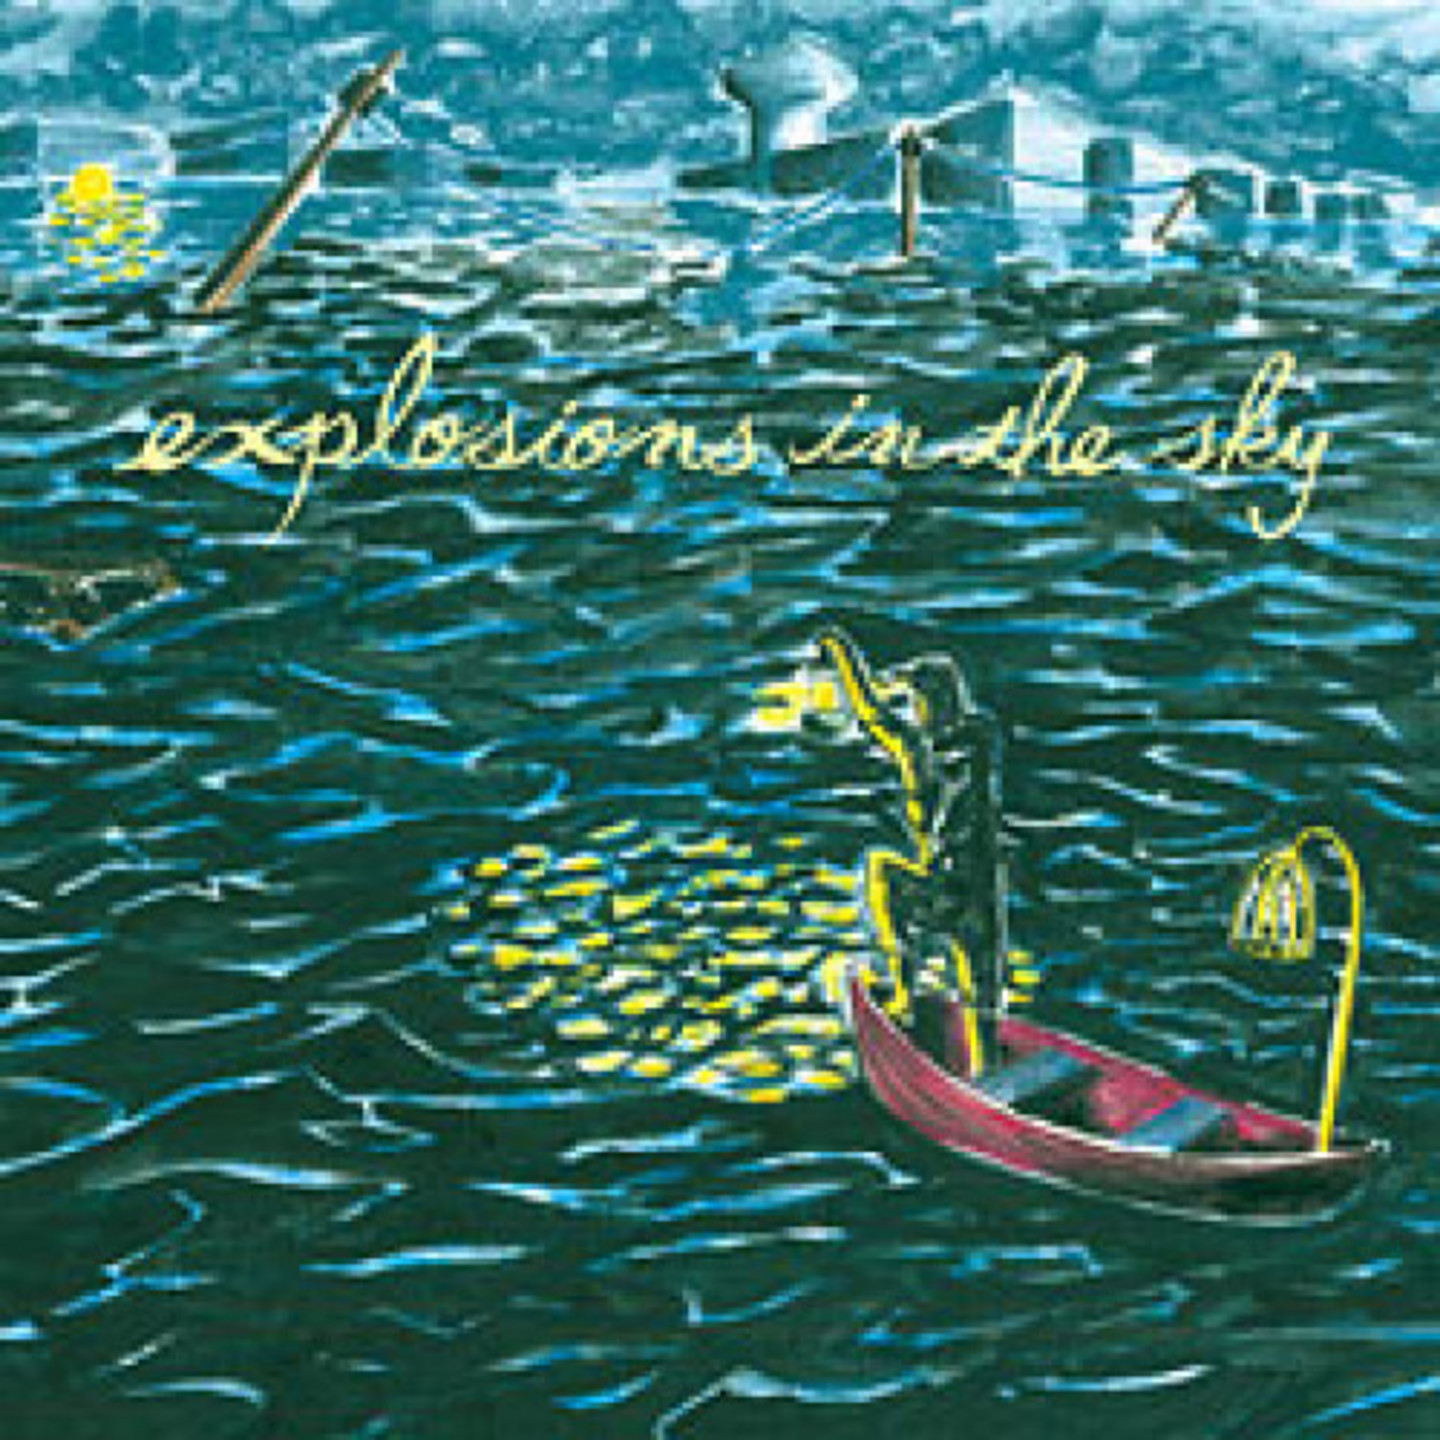 EXPLOSIONS IN THE SKY - All Of A Sudden I Miss Everyone 2xLP